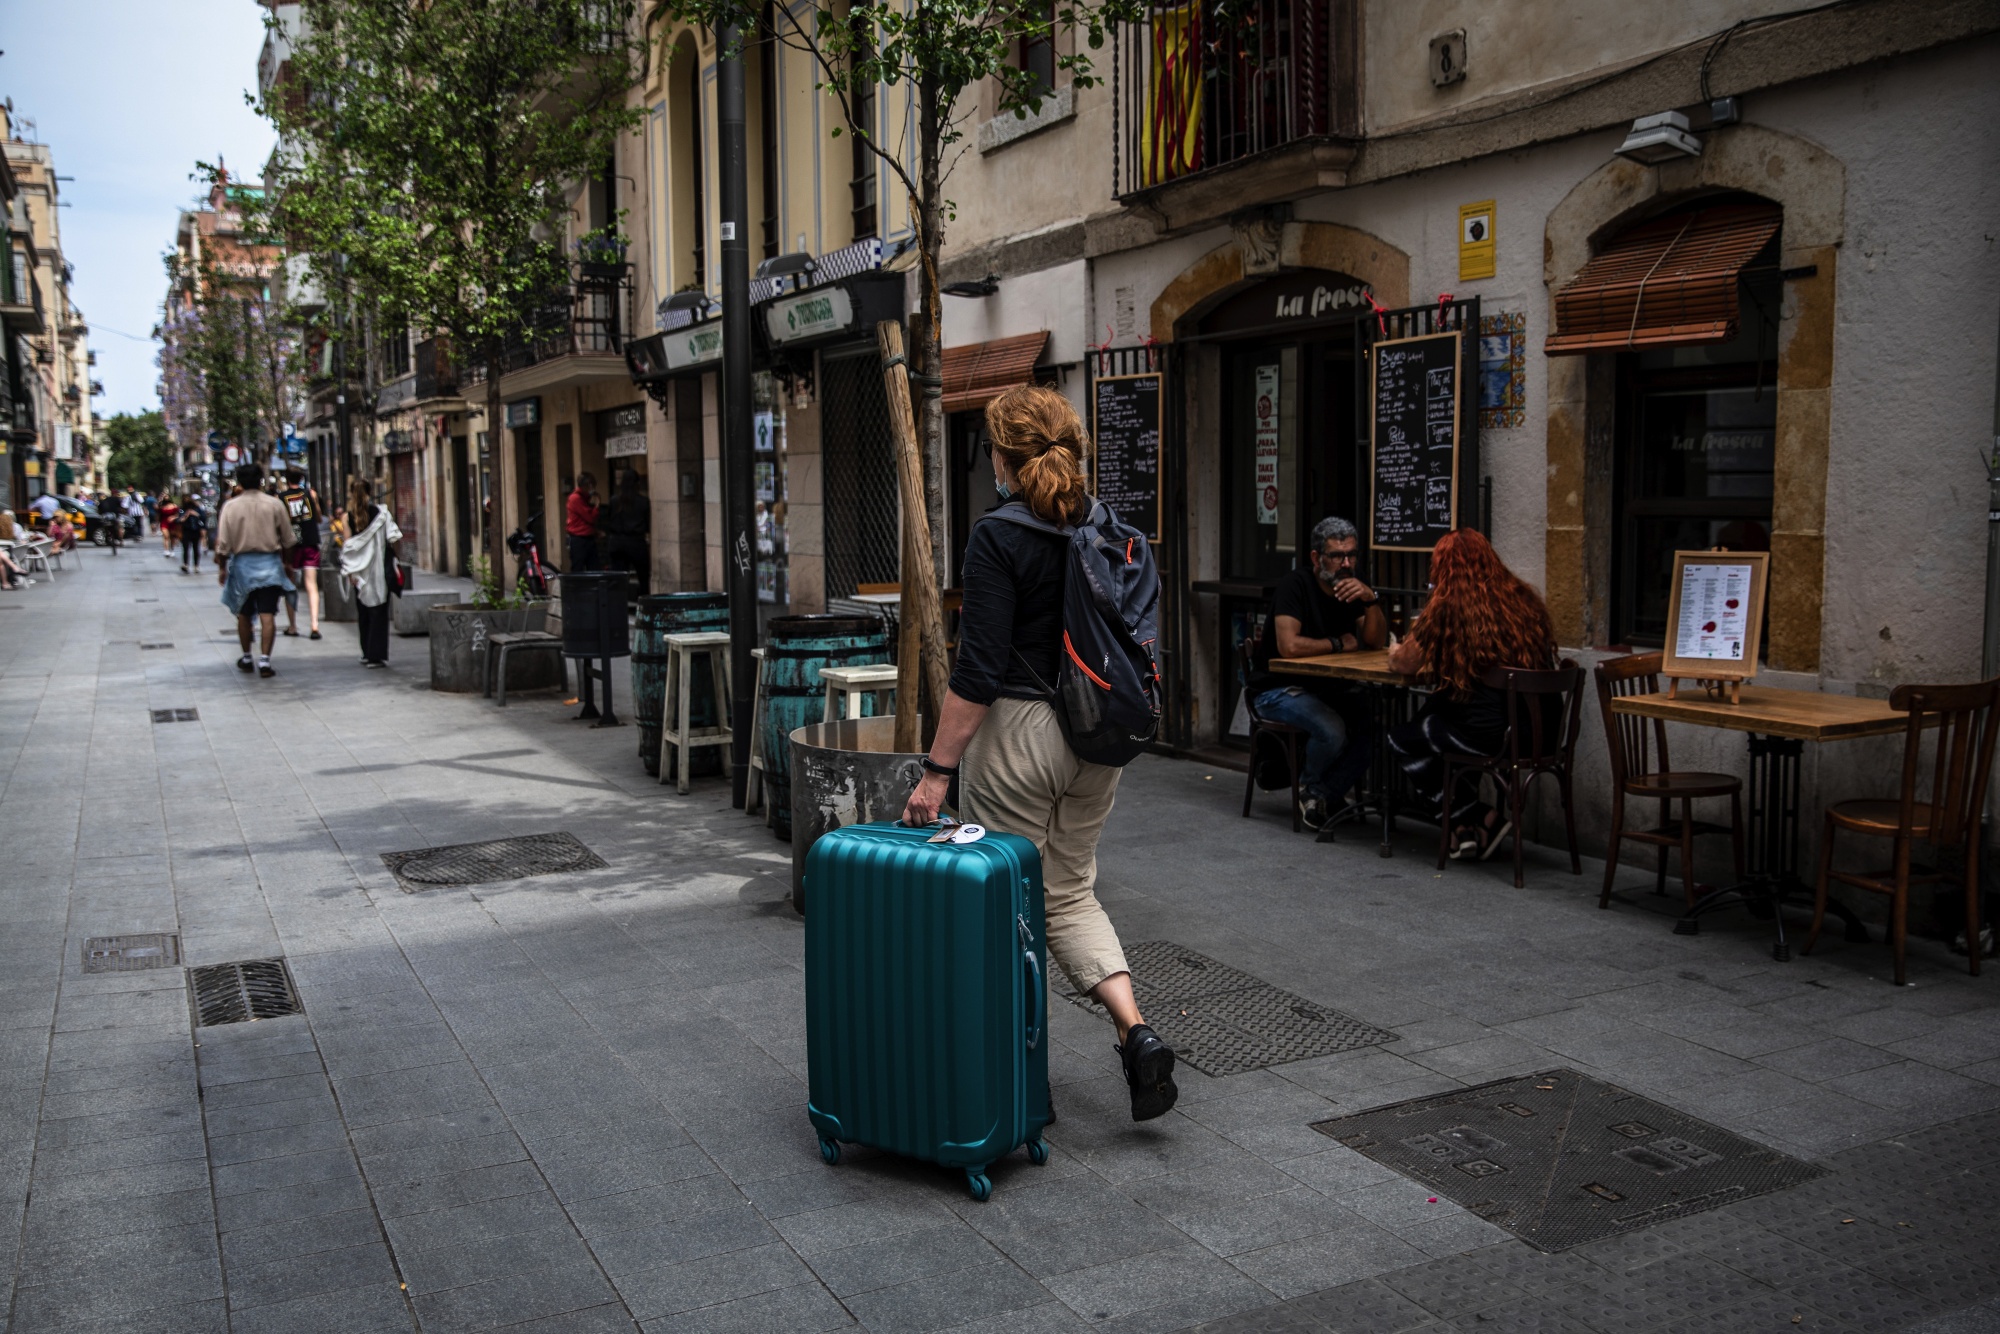 A tourist wheels luggage in the Barceloneta district in Barcelona, Spain, on Saturday, June 5, 2021.